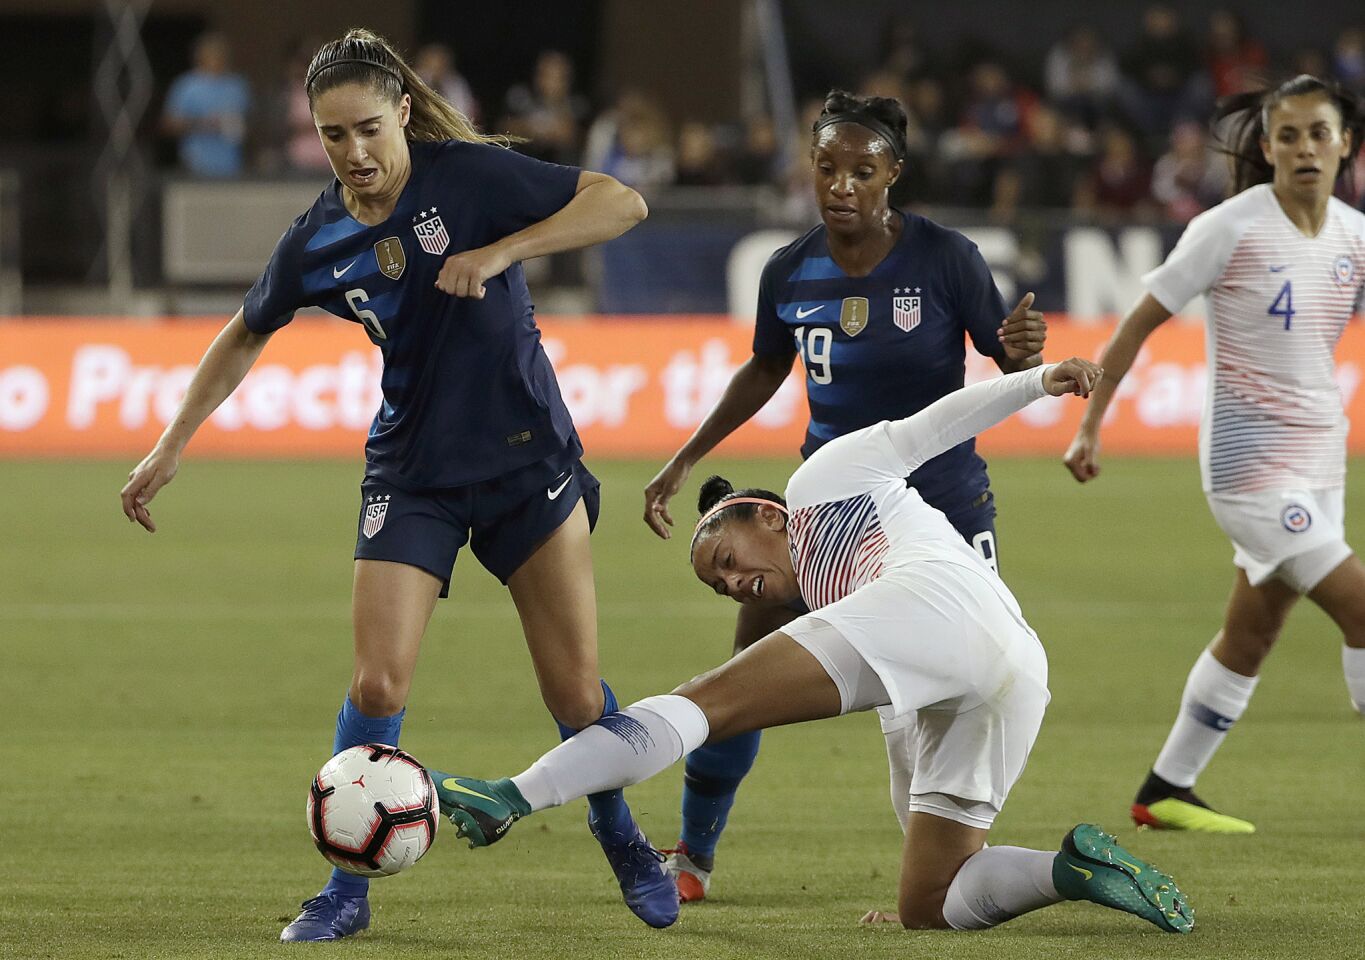 Chile's Claudia Soto, bottom, tries to kick the ball in front of United States' Morgan Brian, left, and Crystal Dunn, center, during the second half of an international friendly soccer match in San Jose, Calif., Tuesday, Sept. 4, 2018. (AP Photo/Jeff Chiu)